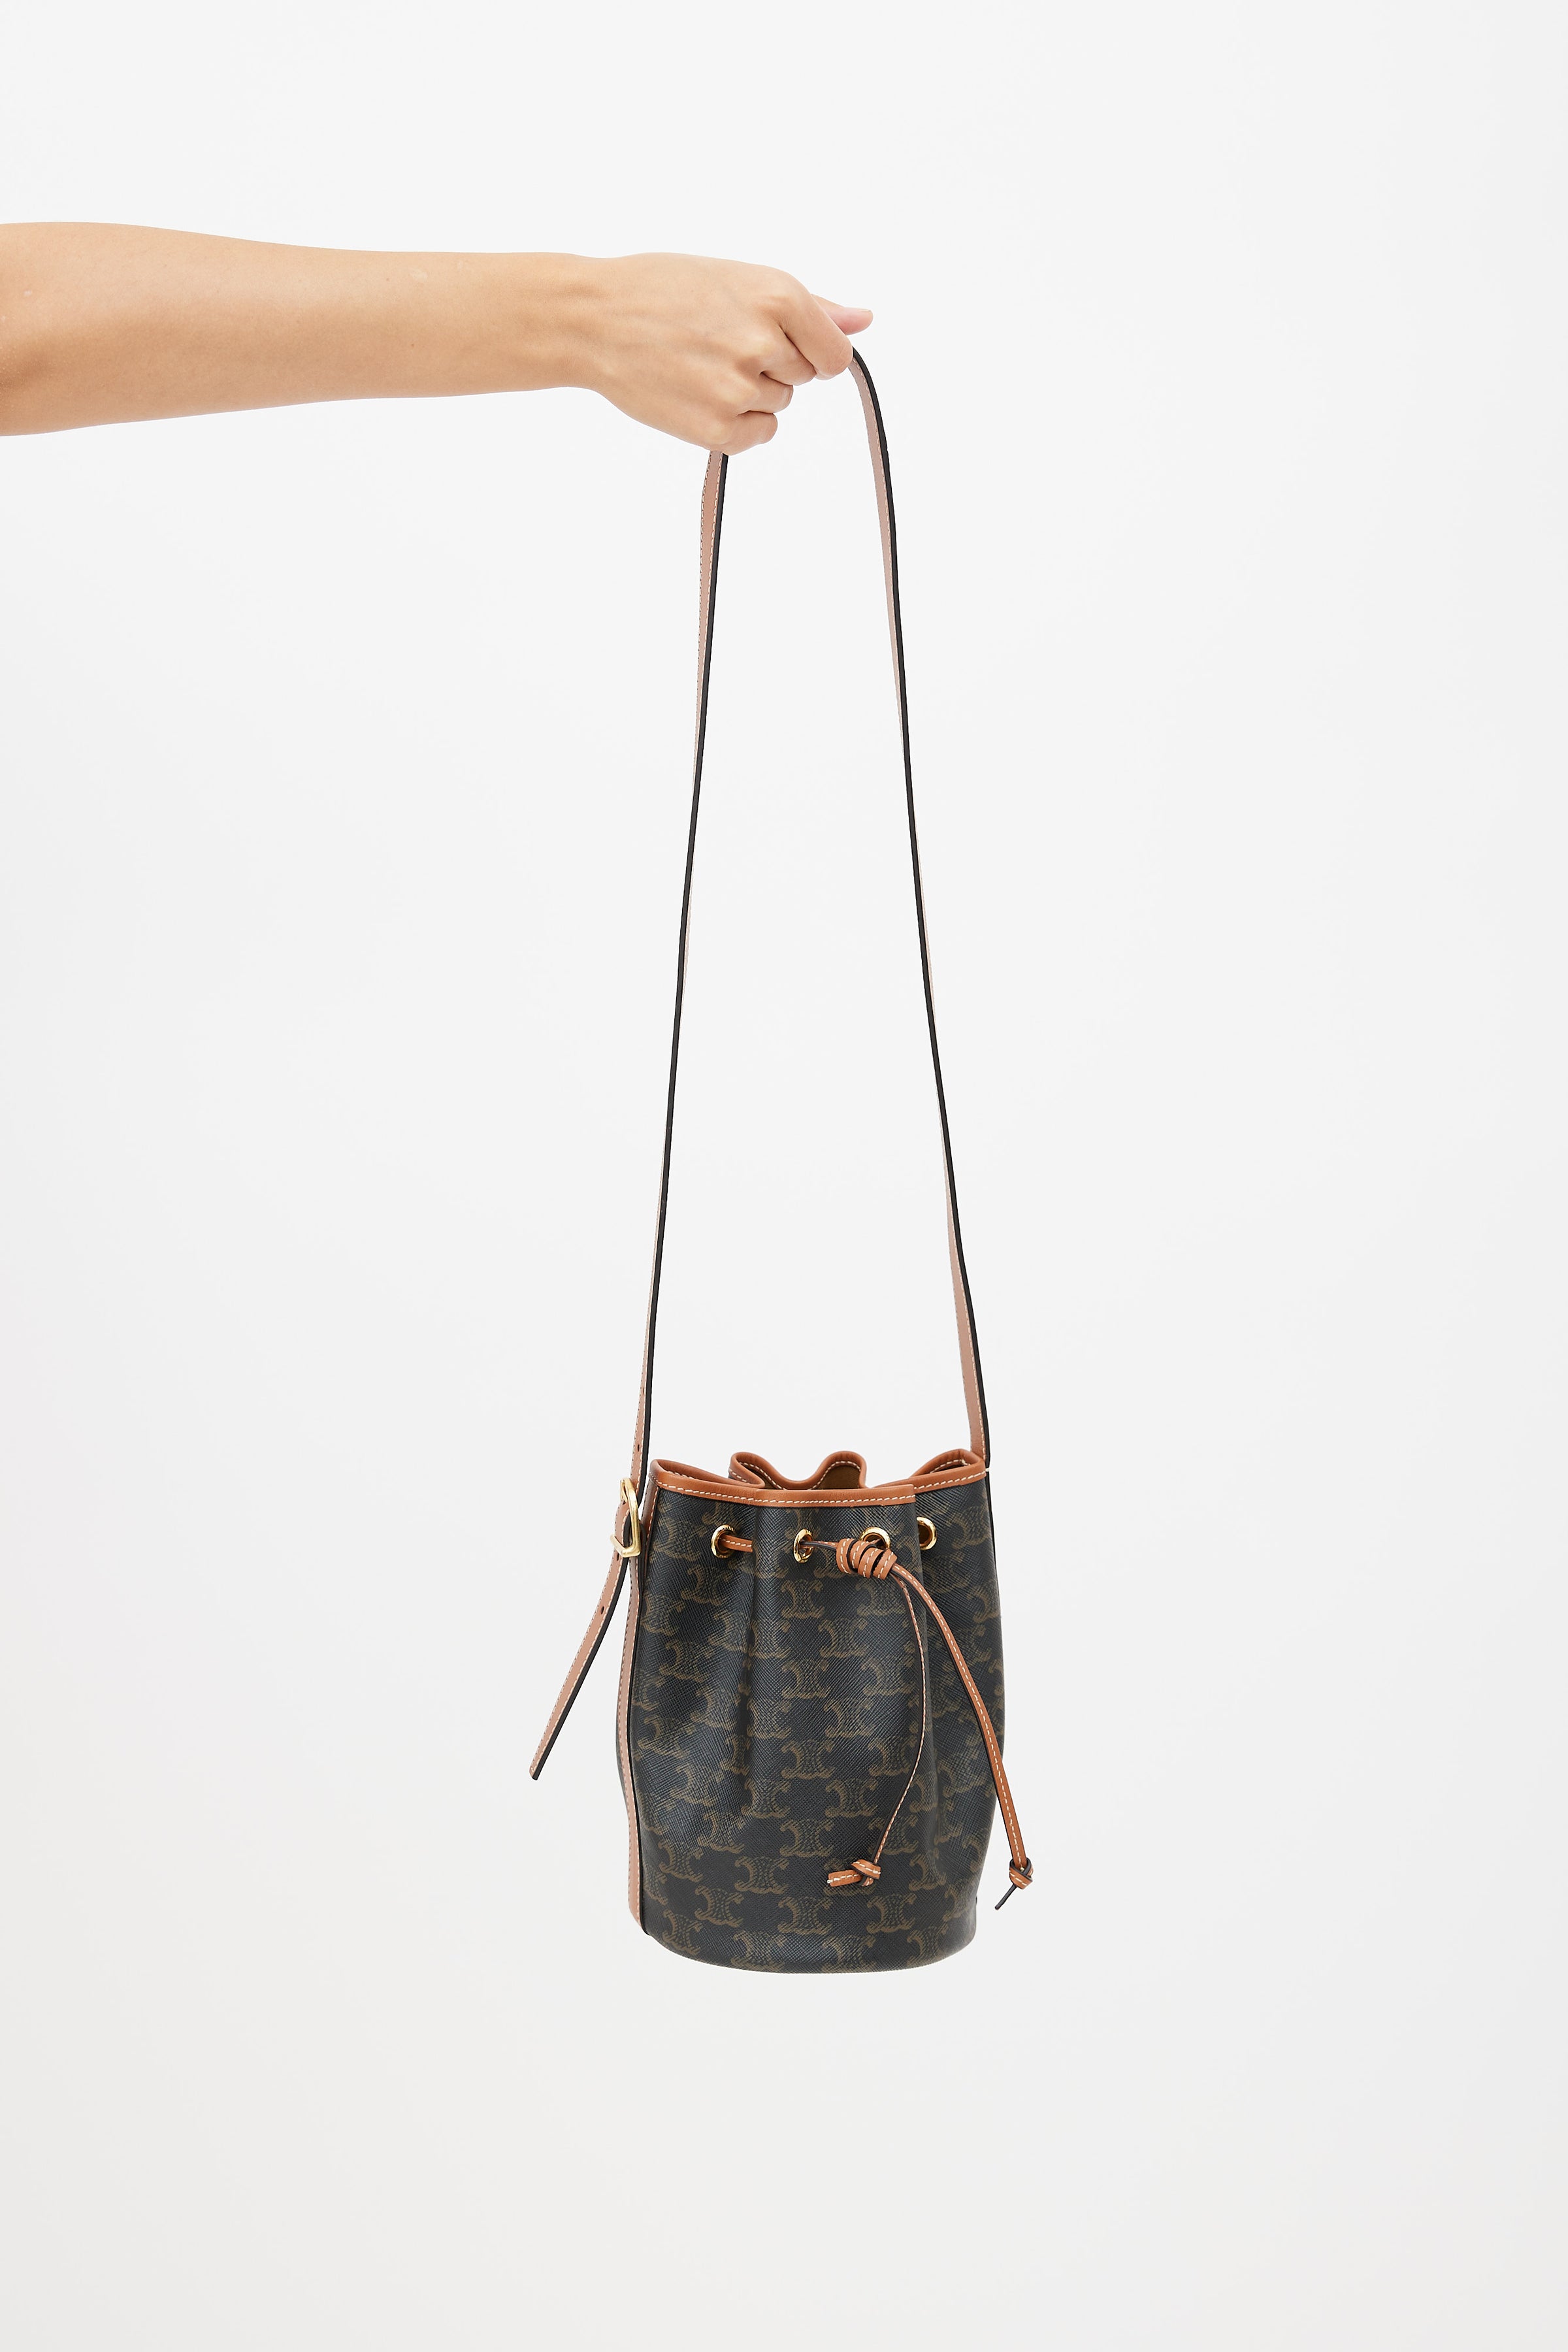 Women's Small Drawstring Bag in Triomphe Canvas, CELINE